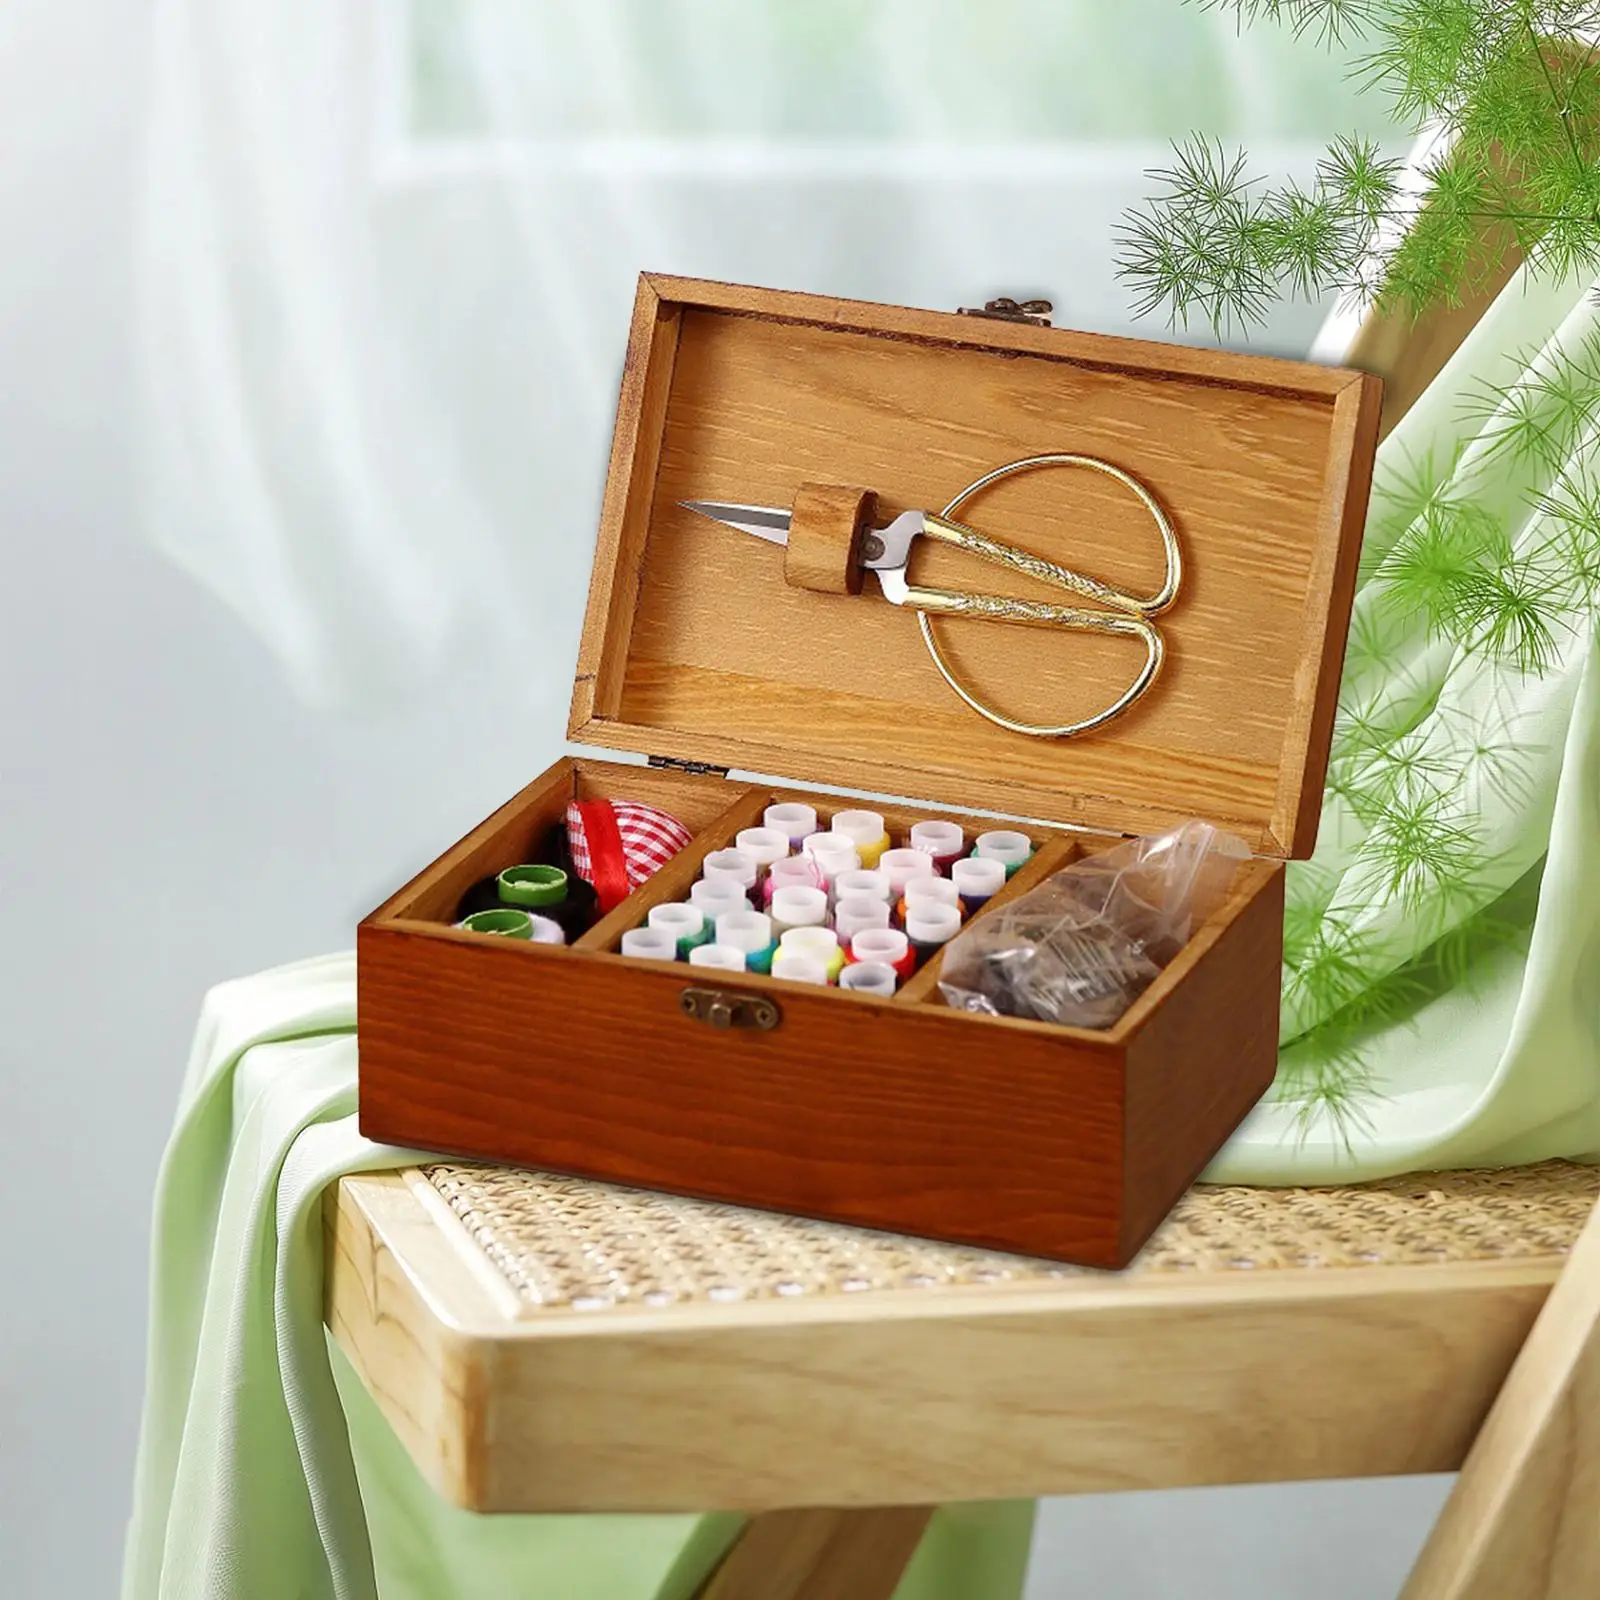 Wooden Sewing Box Empty Box Vintage for Yarn Needle Buttons Needlework Sewing Tools Household DIY Home Travel Needlework Box